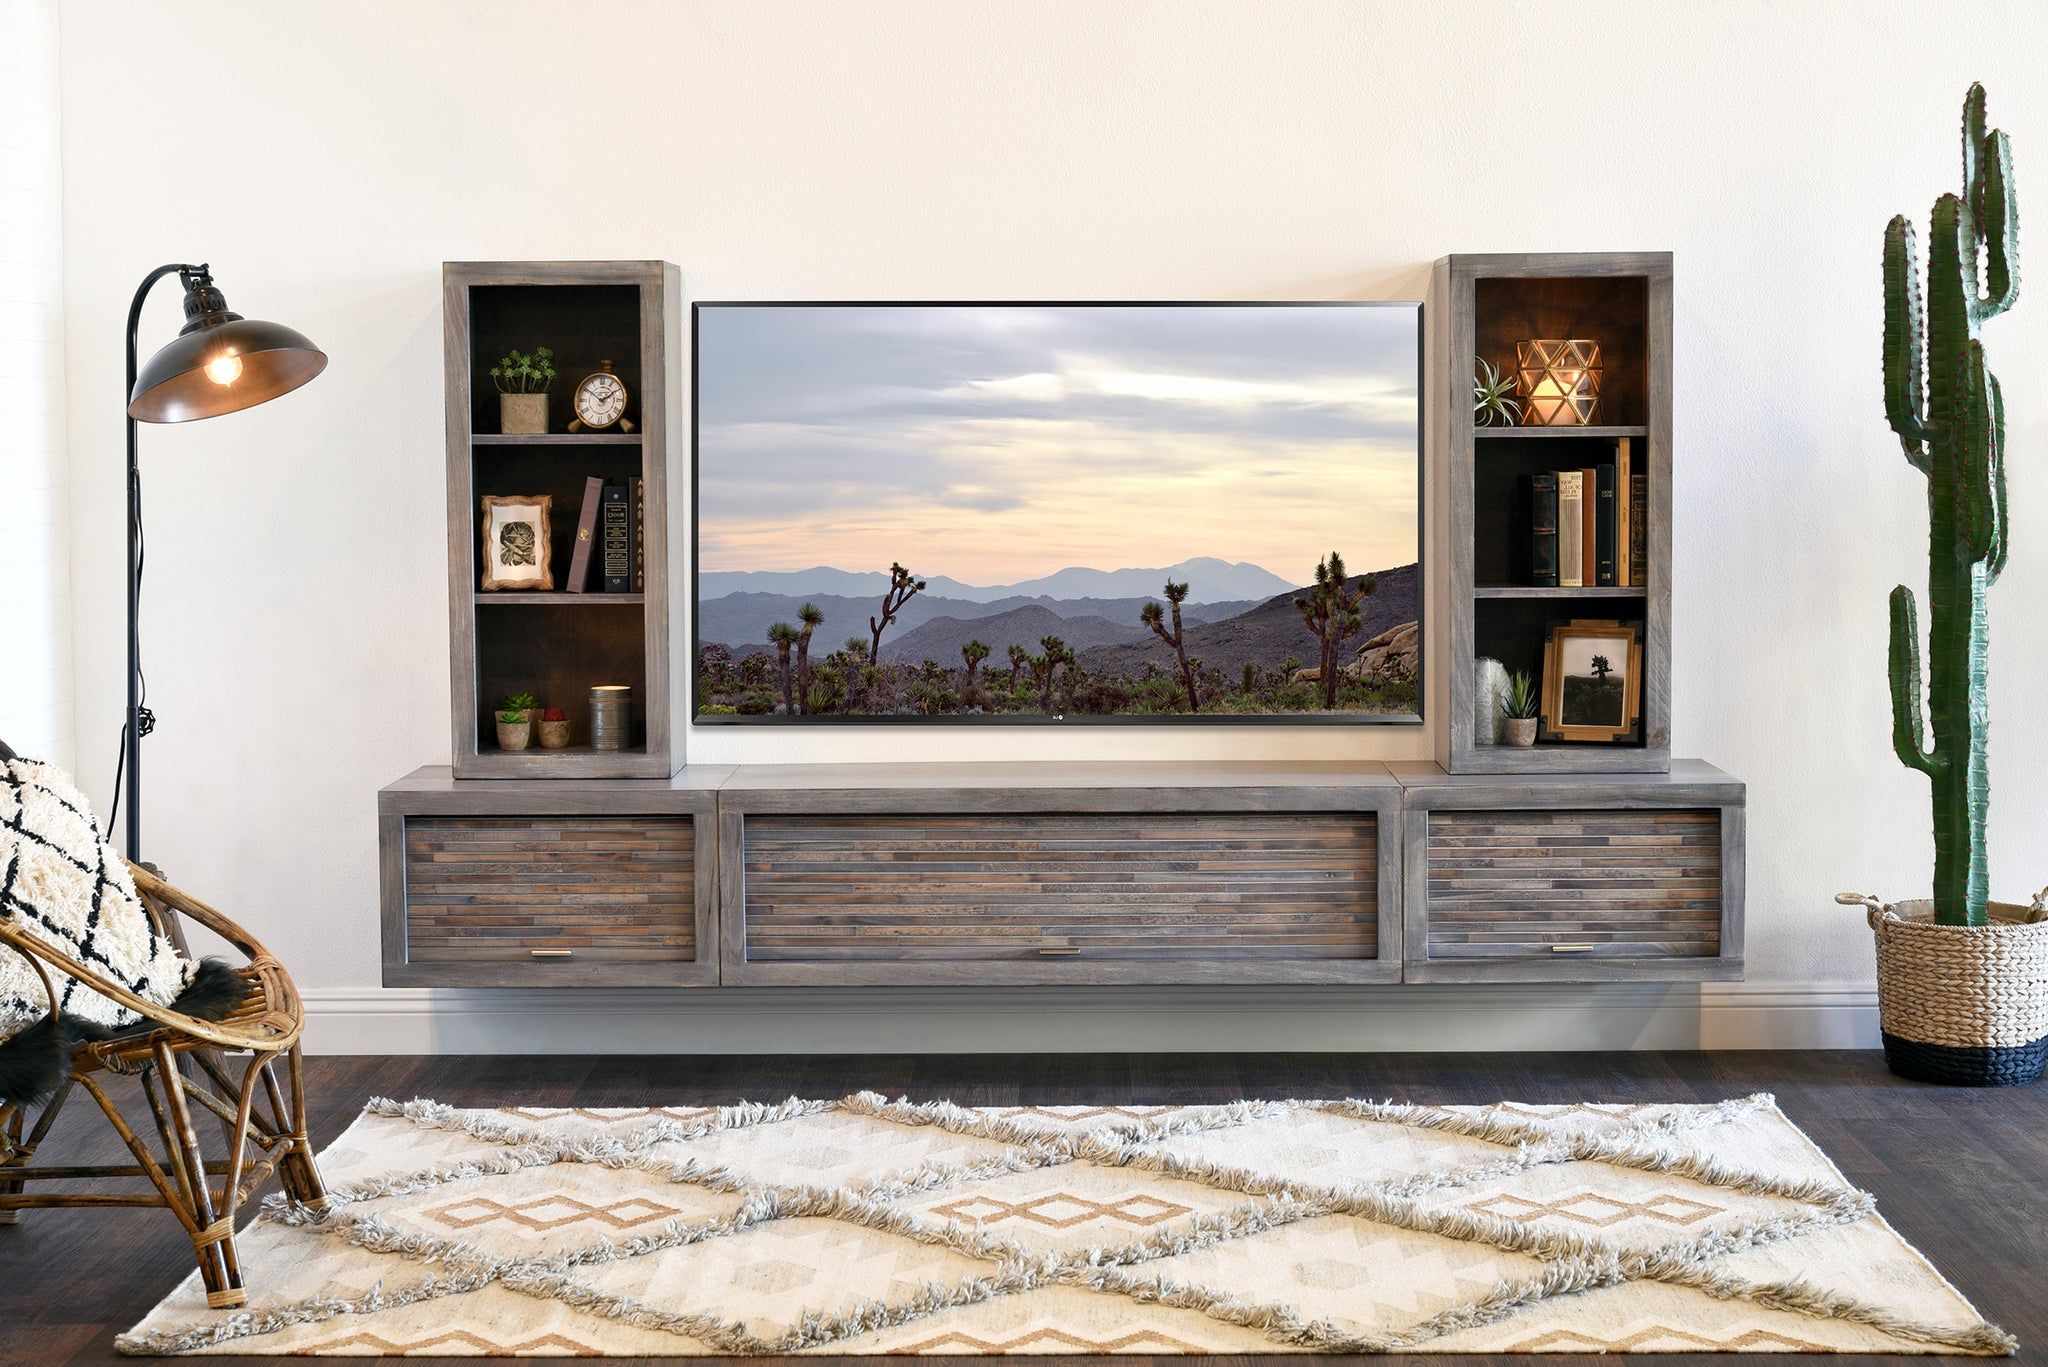 Fashionable Gray Floating Tv Stand Modern Wall Mount Entertainment Center – Eco Ge Inside Wall Mounted Floating Tv Stands (Photo 7 of 15)